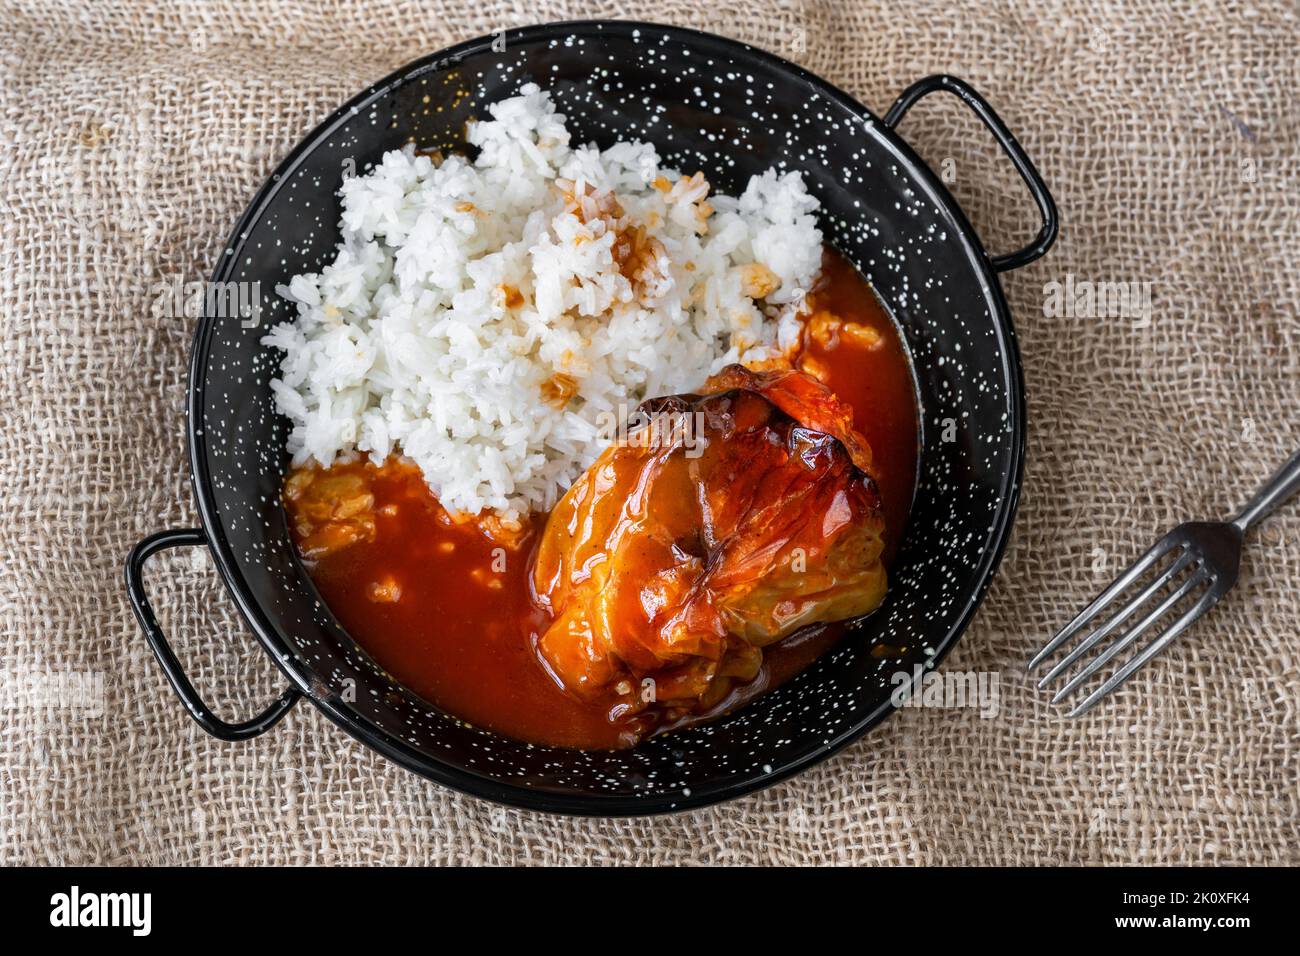 Baked stuffed paprika with minced beef in tomato sauce with boiled rice on black rustic pan on jute fabric background with fork. Stock Photo